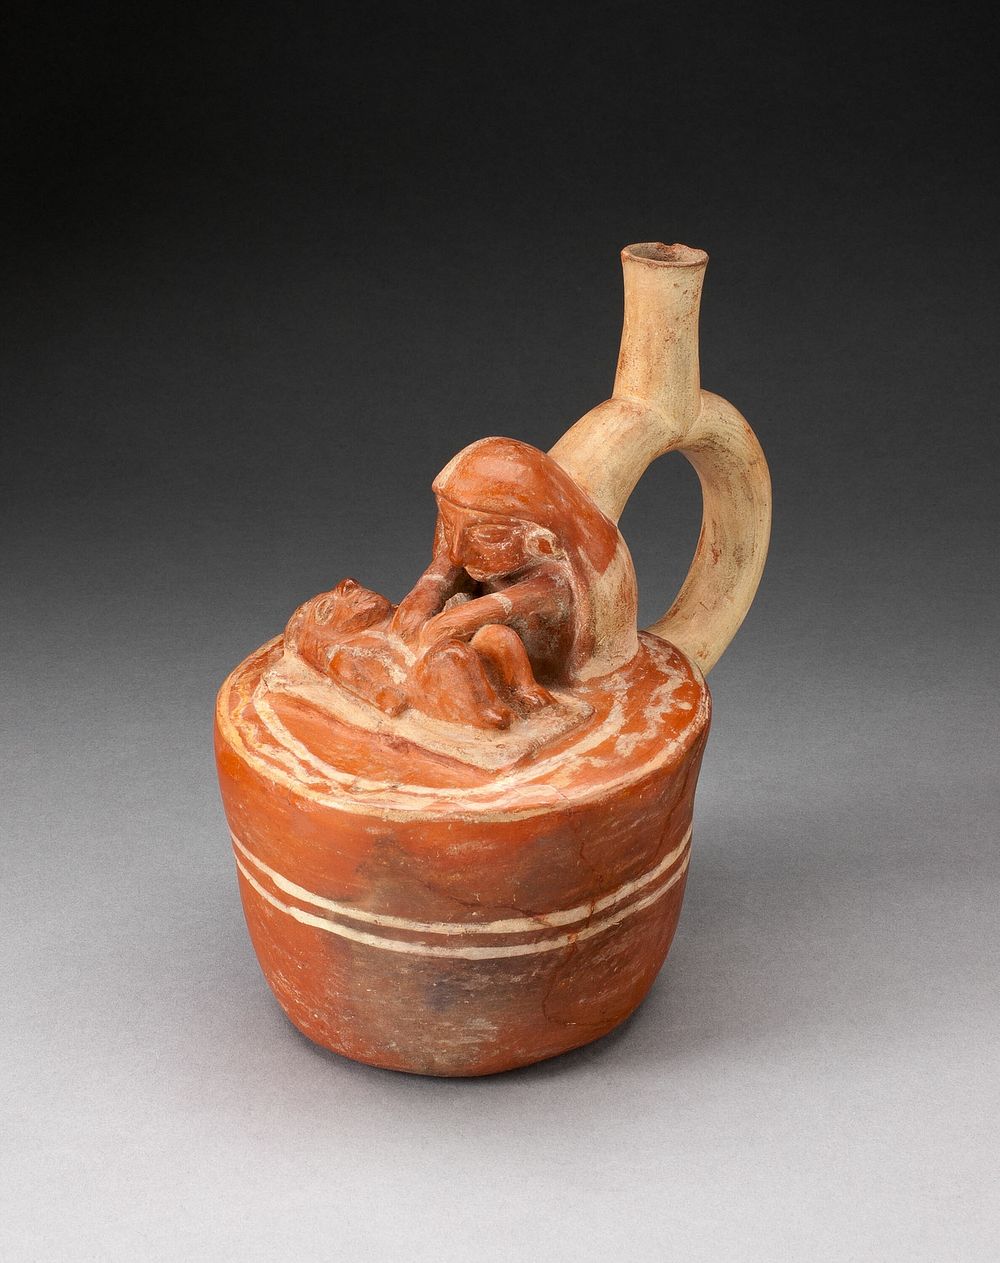 Handle Spout Vessel with Healer or Midwife Touching a Reclining Figure by Moche